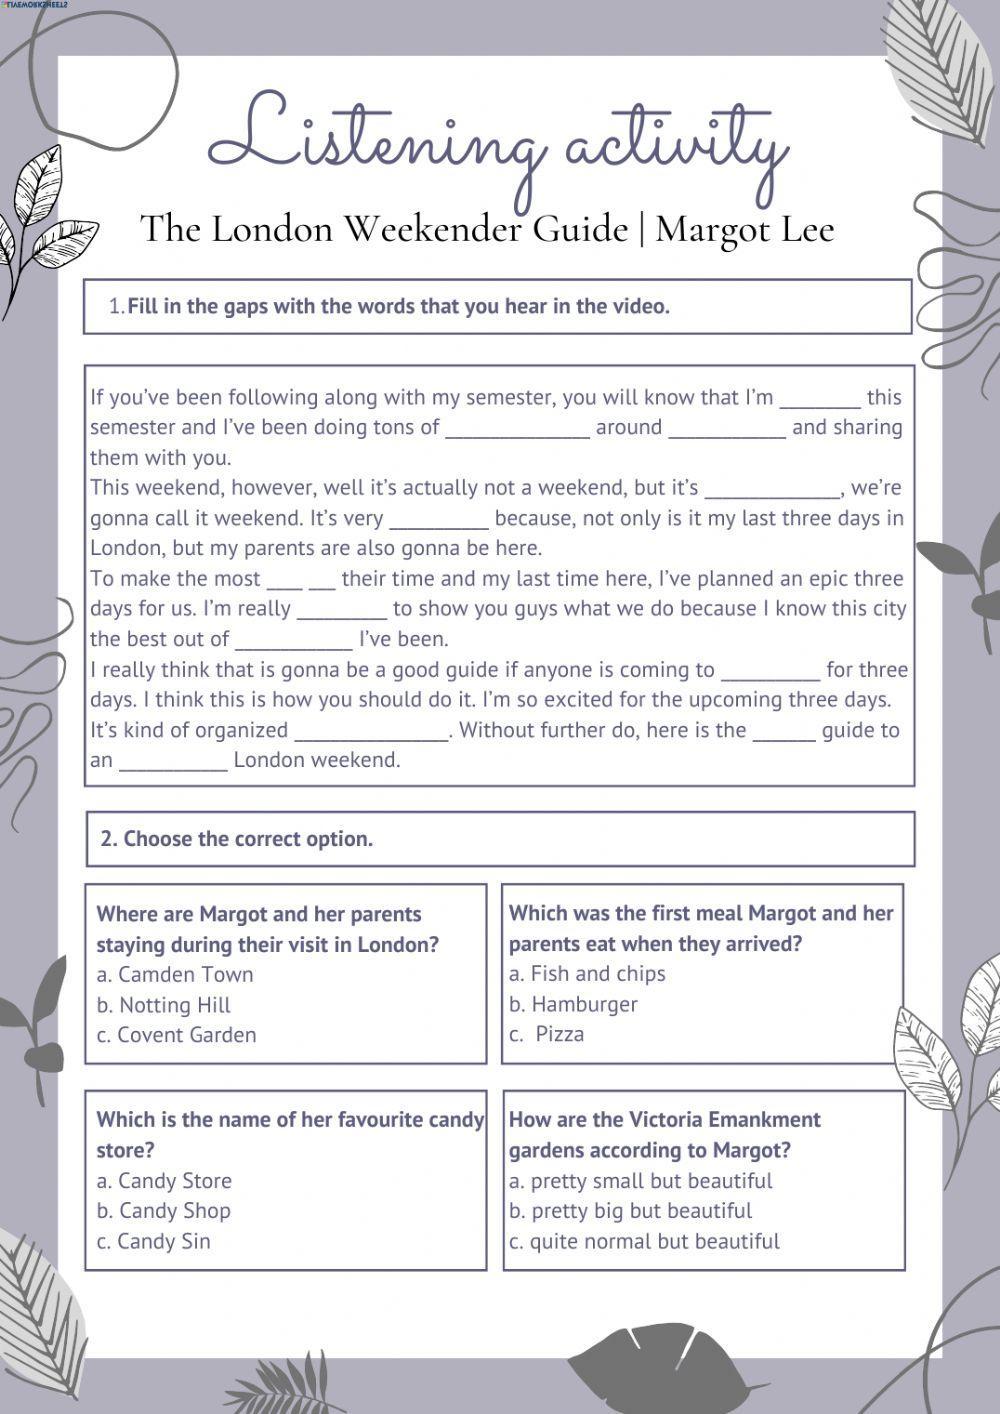 LISTENING ACTIVITY. THE LONDON WEEKENDER GUIDE